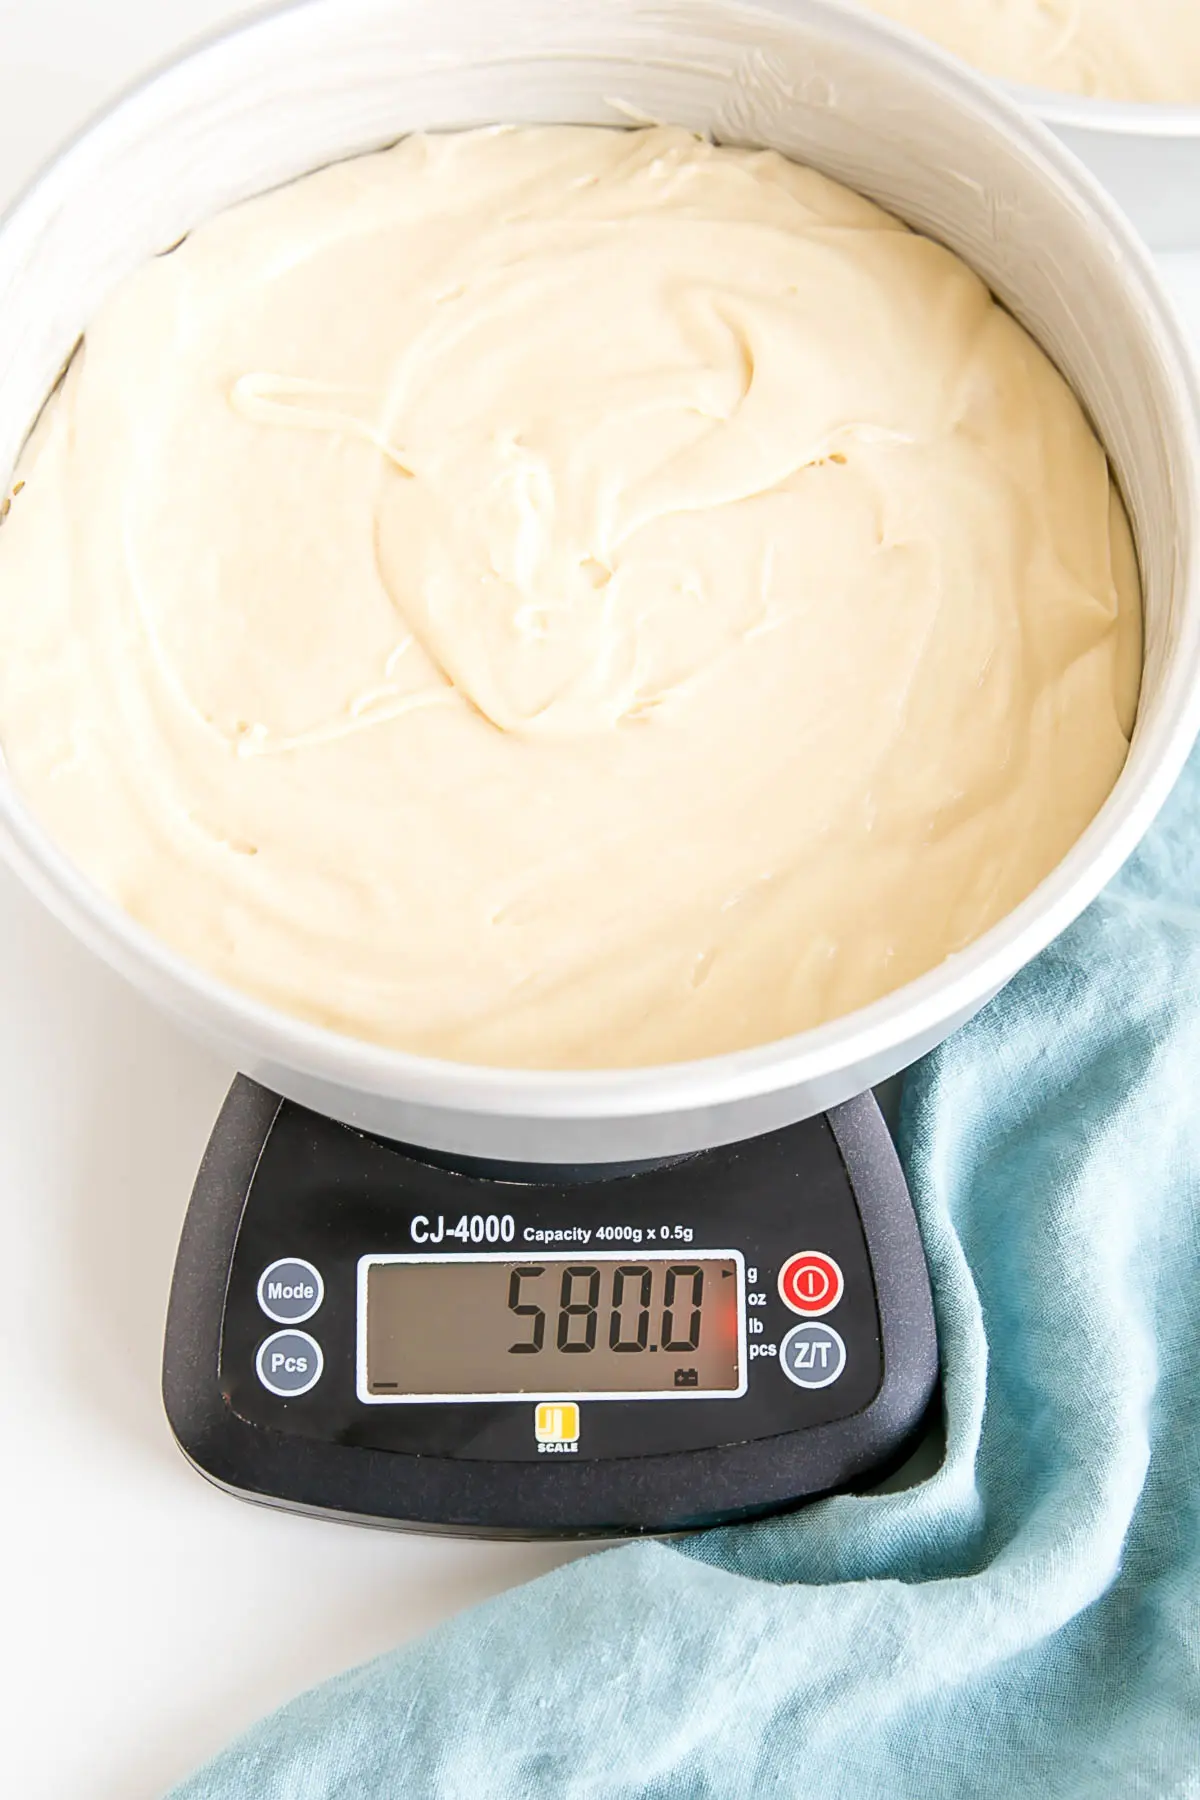 Cake pan filled with cake batter on a kitchen scale.